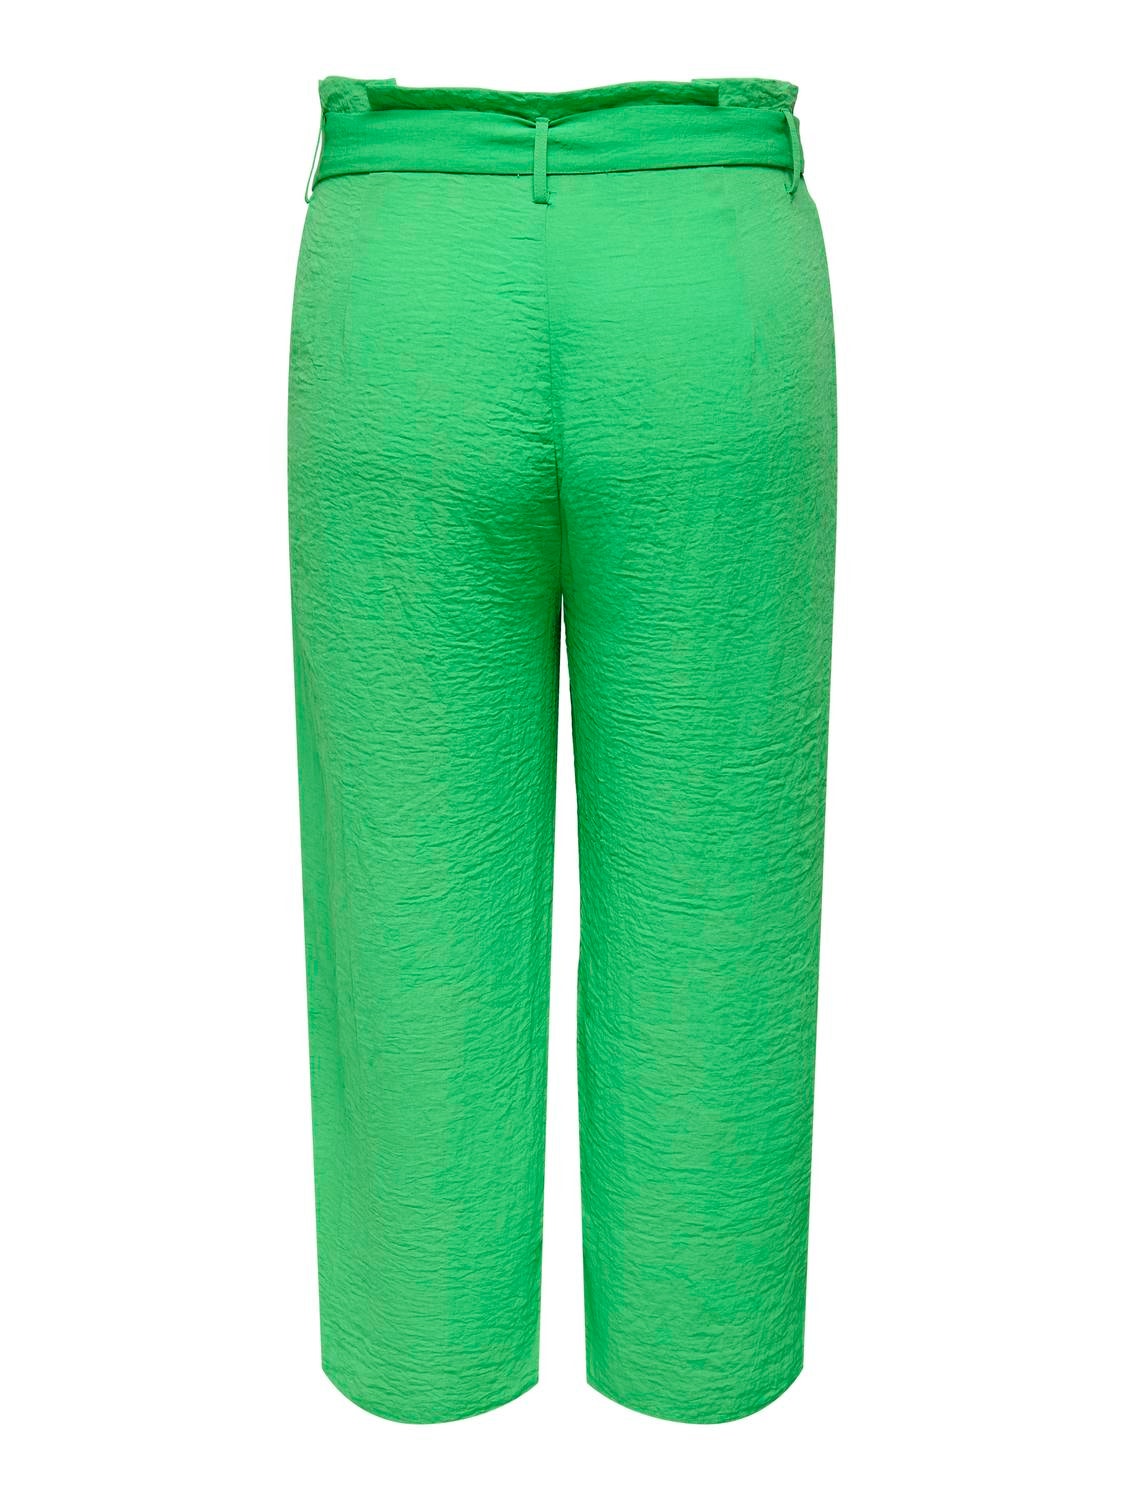 ONLY Curvy wide Leg Pants With Belt -Summer Green - 15290293